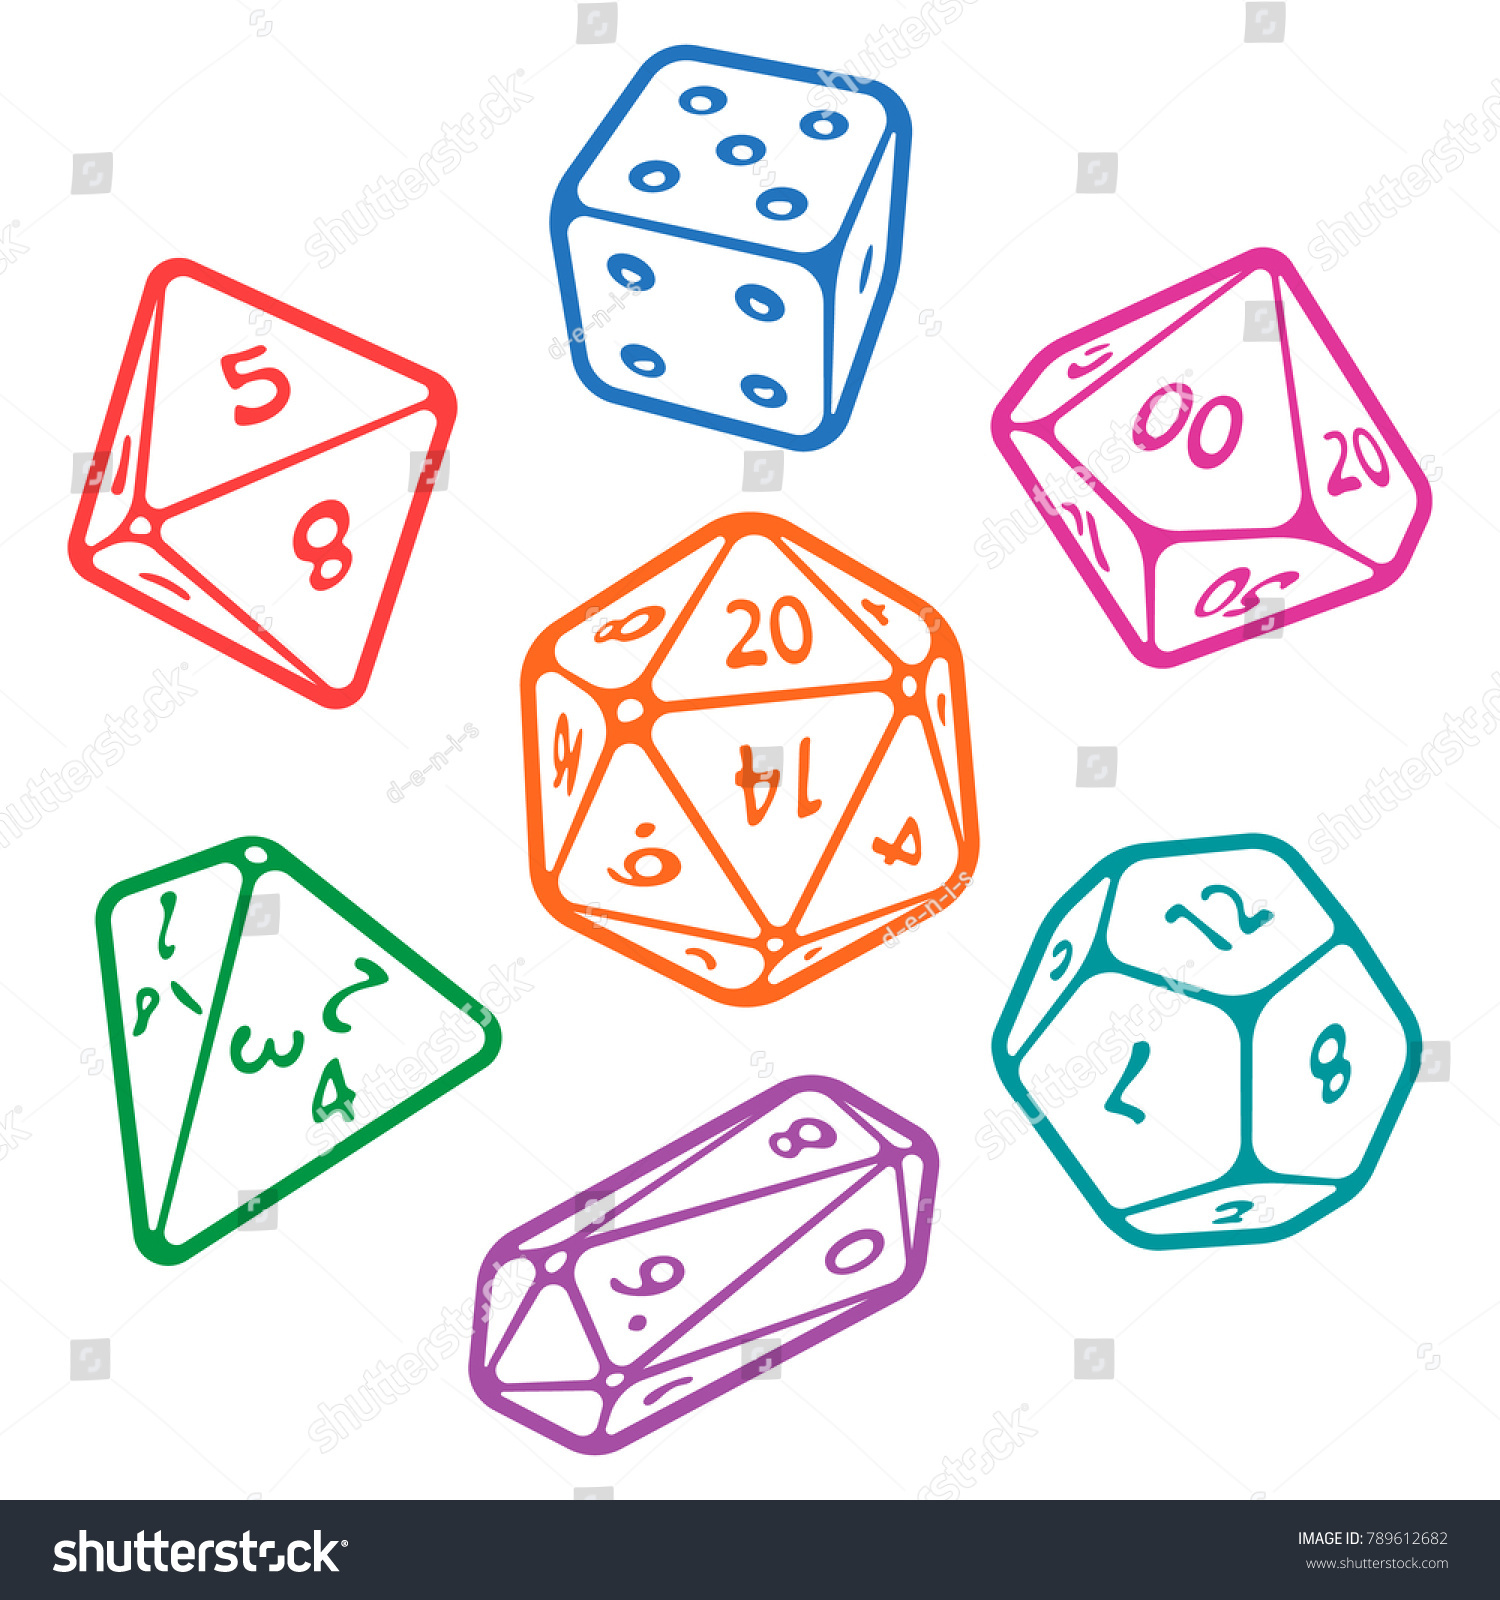 SVG of Vector icon set of dice for fantasy dnd and rpg tabletop games. Board game polyhedral dices with different sides: d4, d6, d8, d10, d12, d20 isolated on white background svg